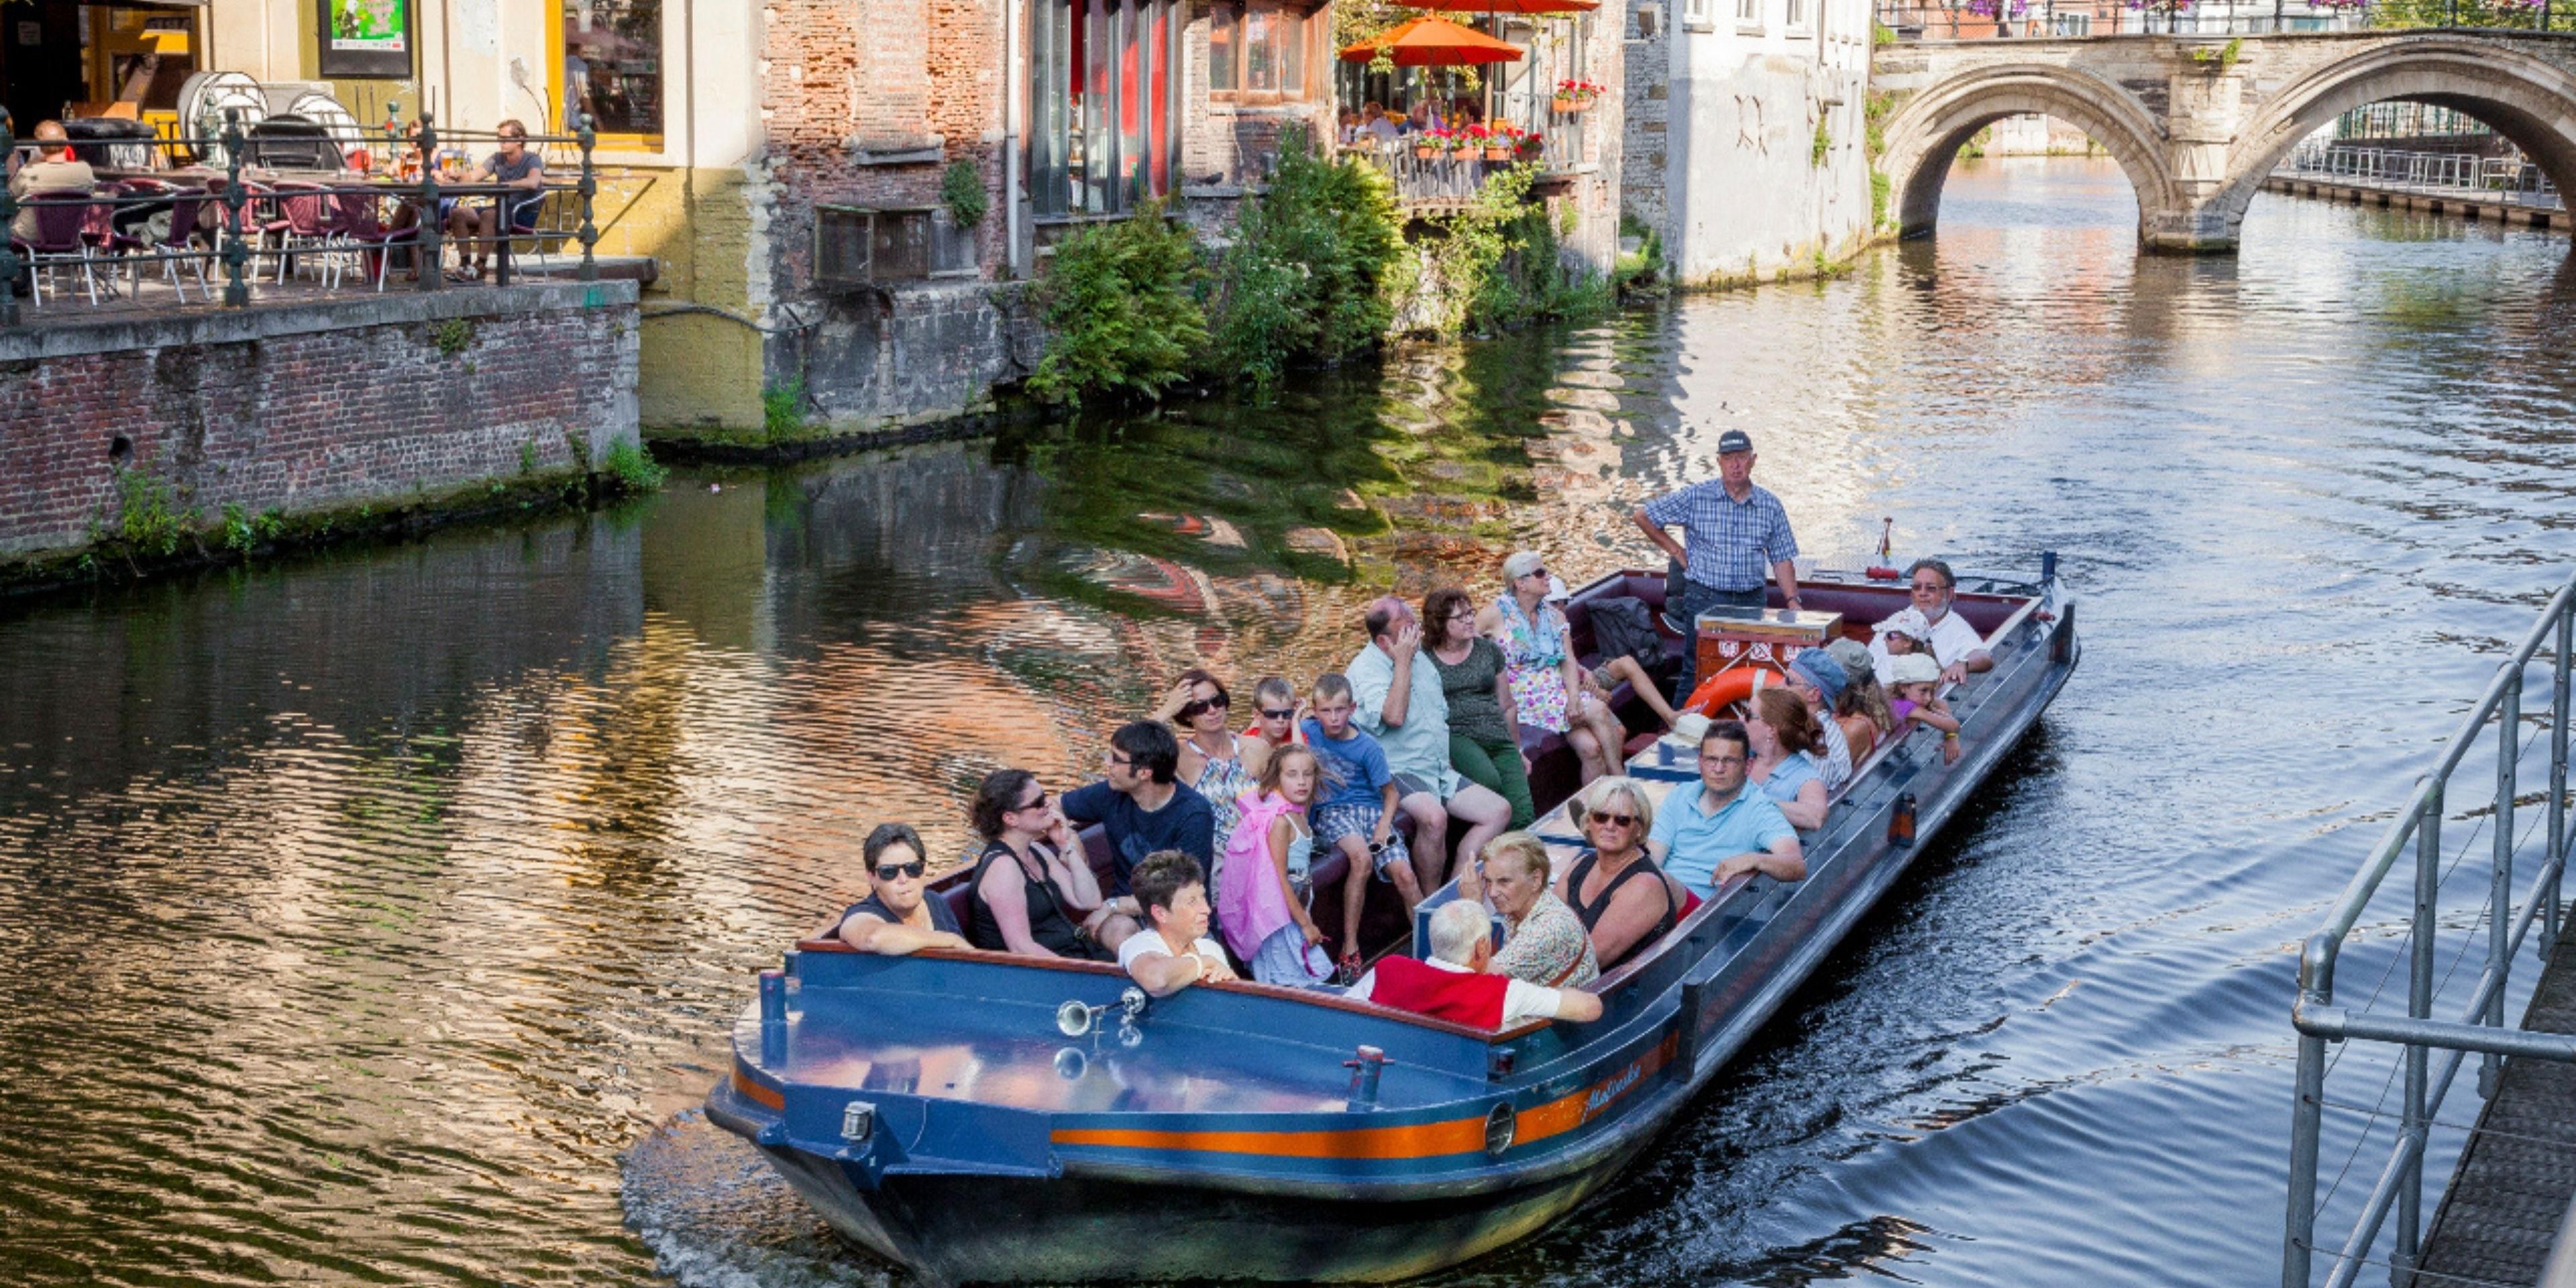 Would you like to experience Mechelen in a different way? Embark on a fascinating boat trip on the Dyle. Discover the sights on the banks. Facts about Mechelen are told via sound recording or by a city guide.